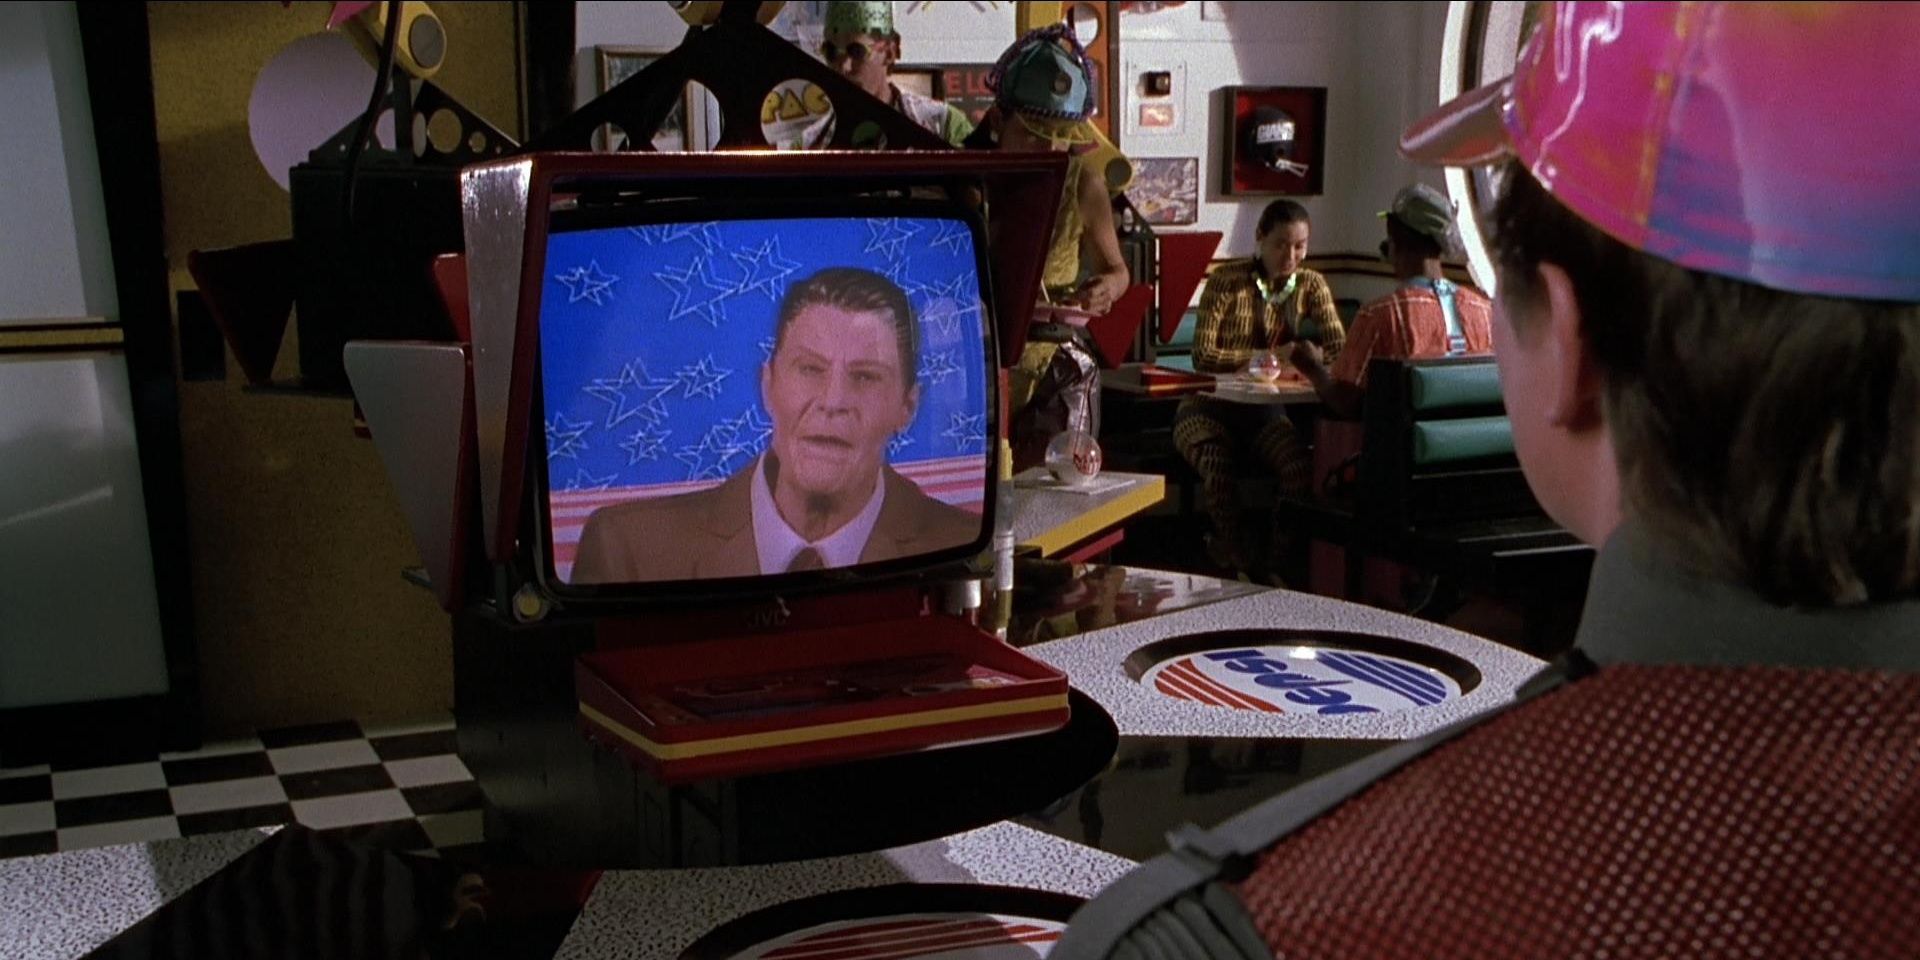 Video waiter at Cafe 80s in Back to the Future 2